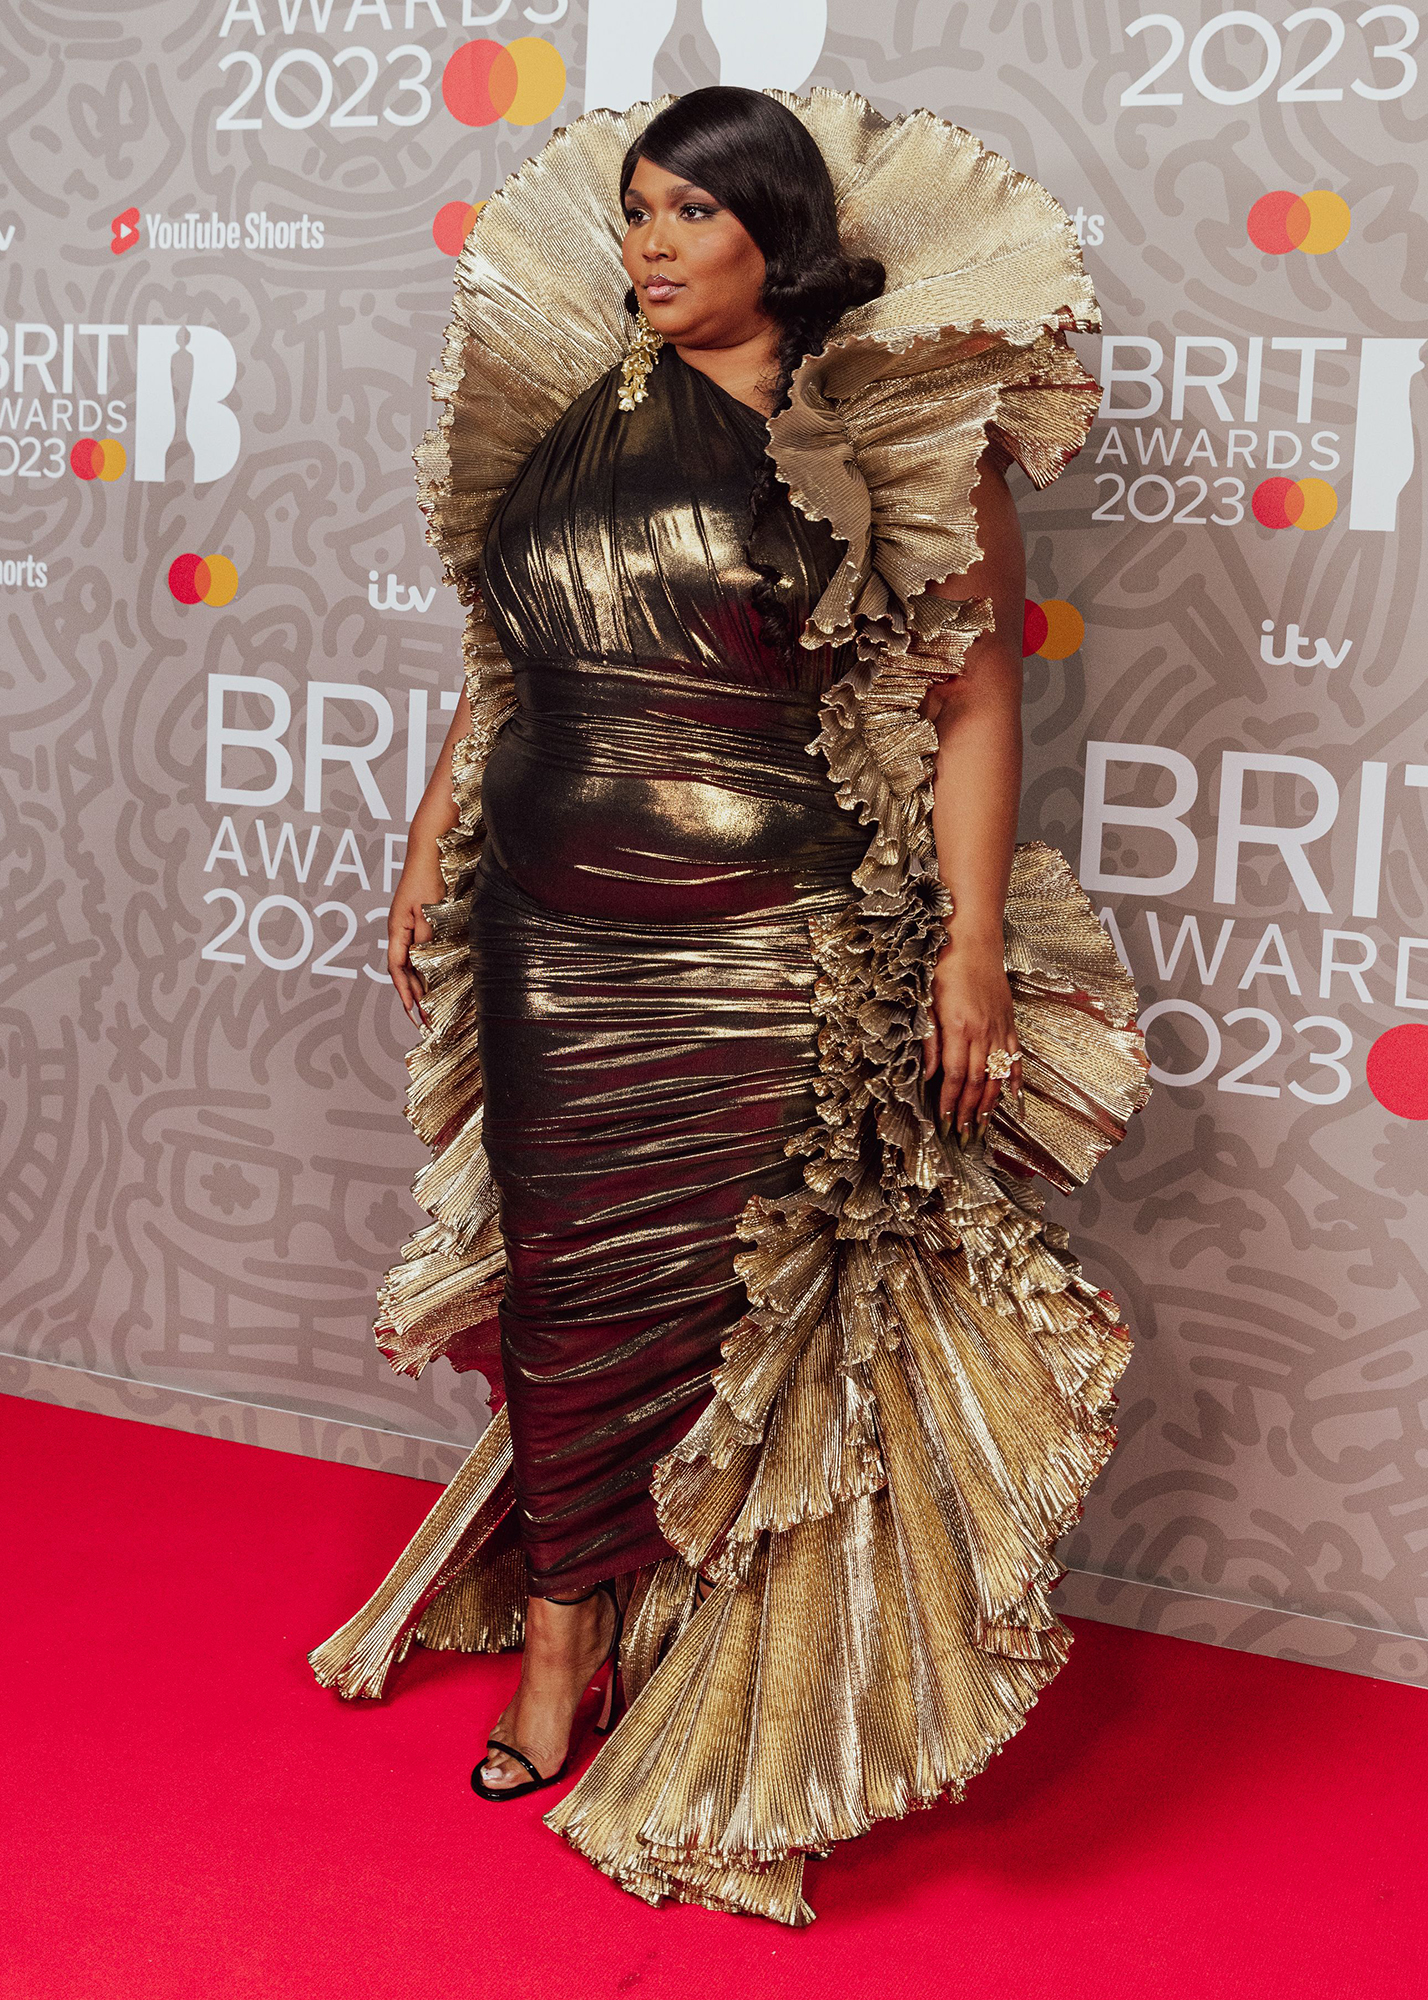 Brit Awards 2023 Carpet Style Photos: What the Stars